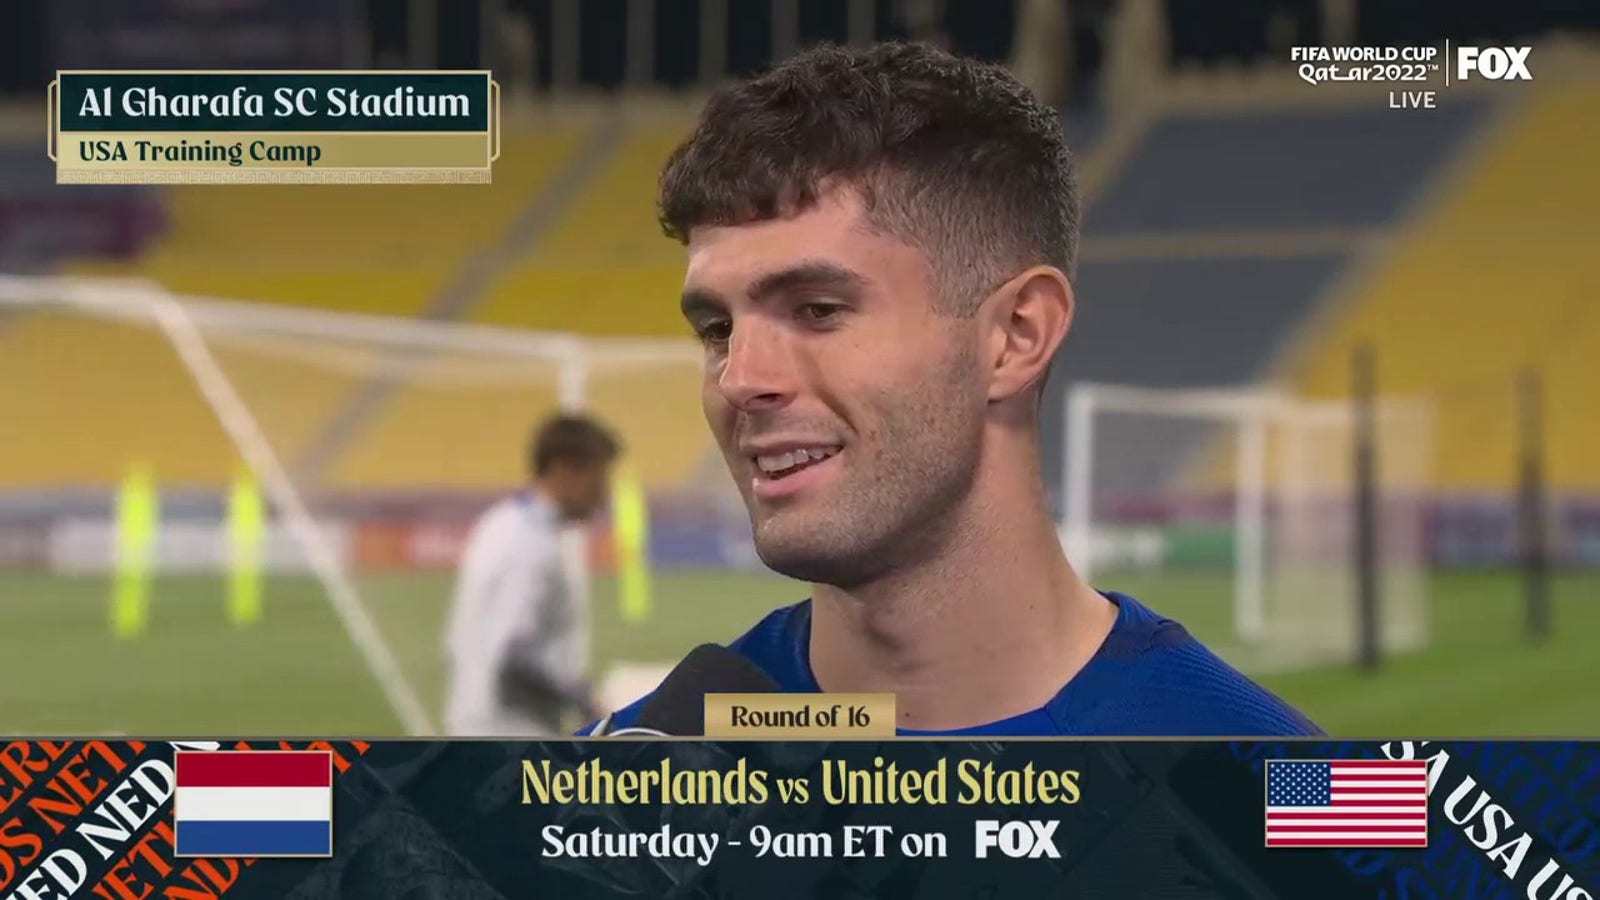 Christian Pulisic provides an update on his status ahead of the United States vs. Netherlands match at the 2022 FIFA World Cup.